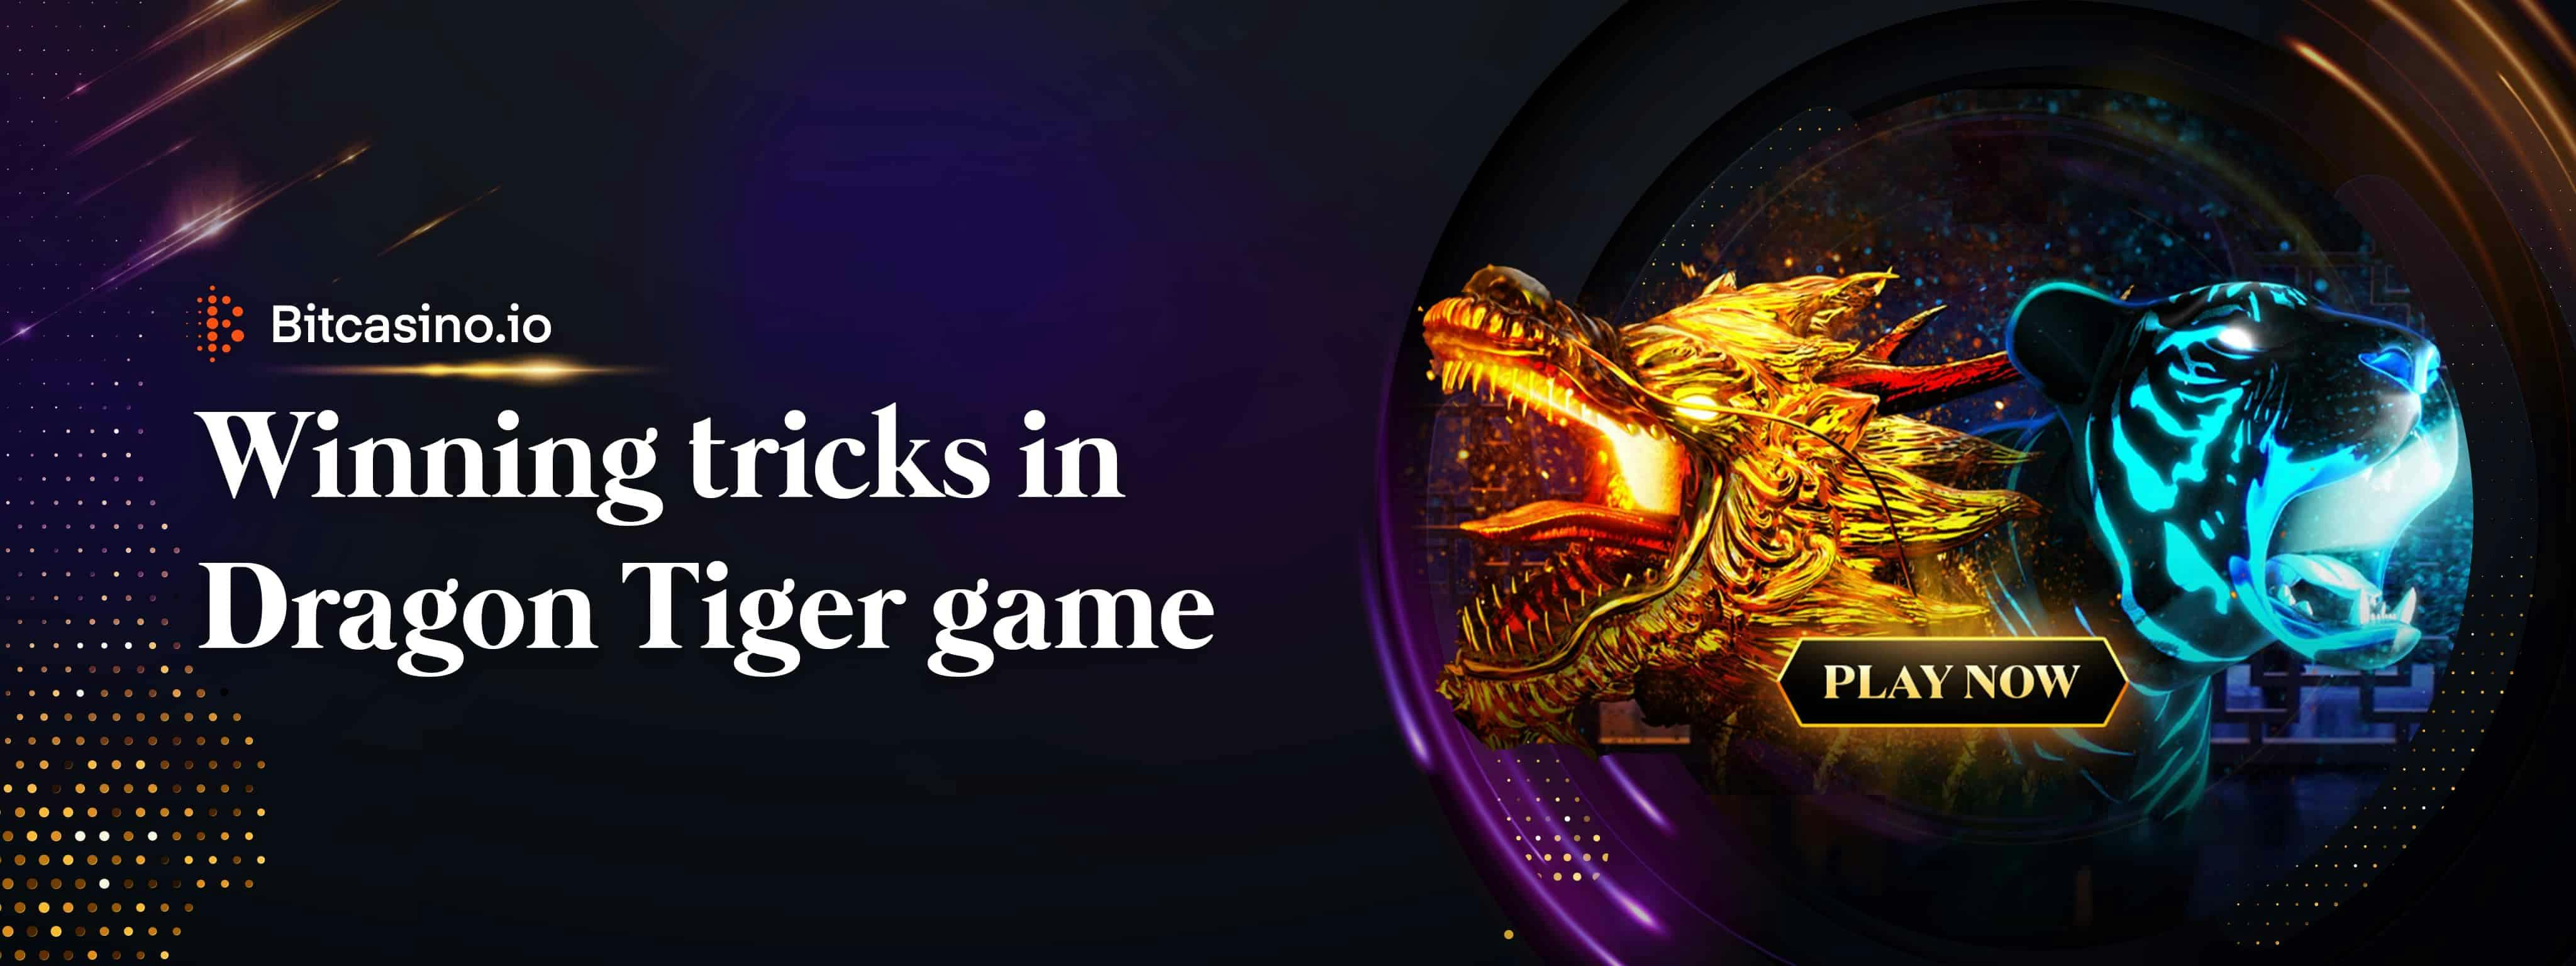 Bet on the right side with Dragon Tiger game-winning tricks